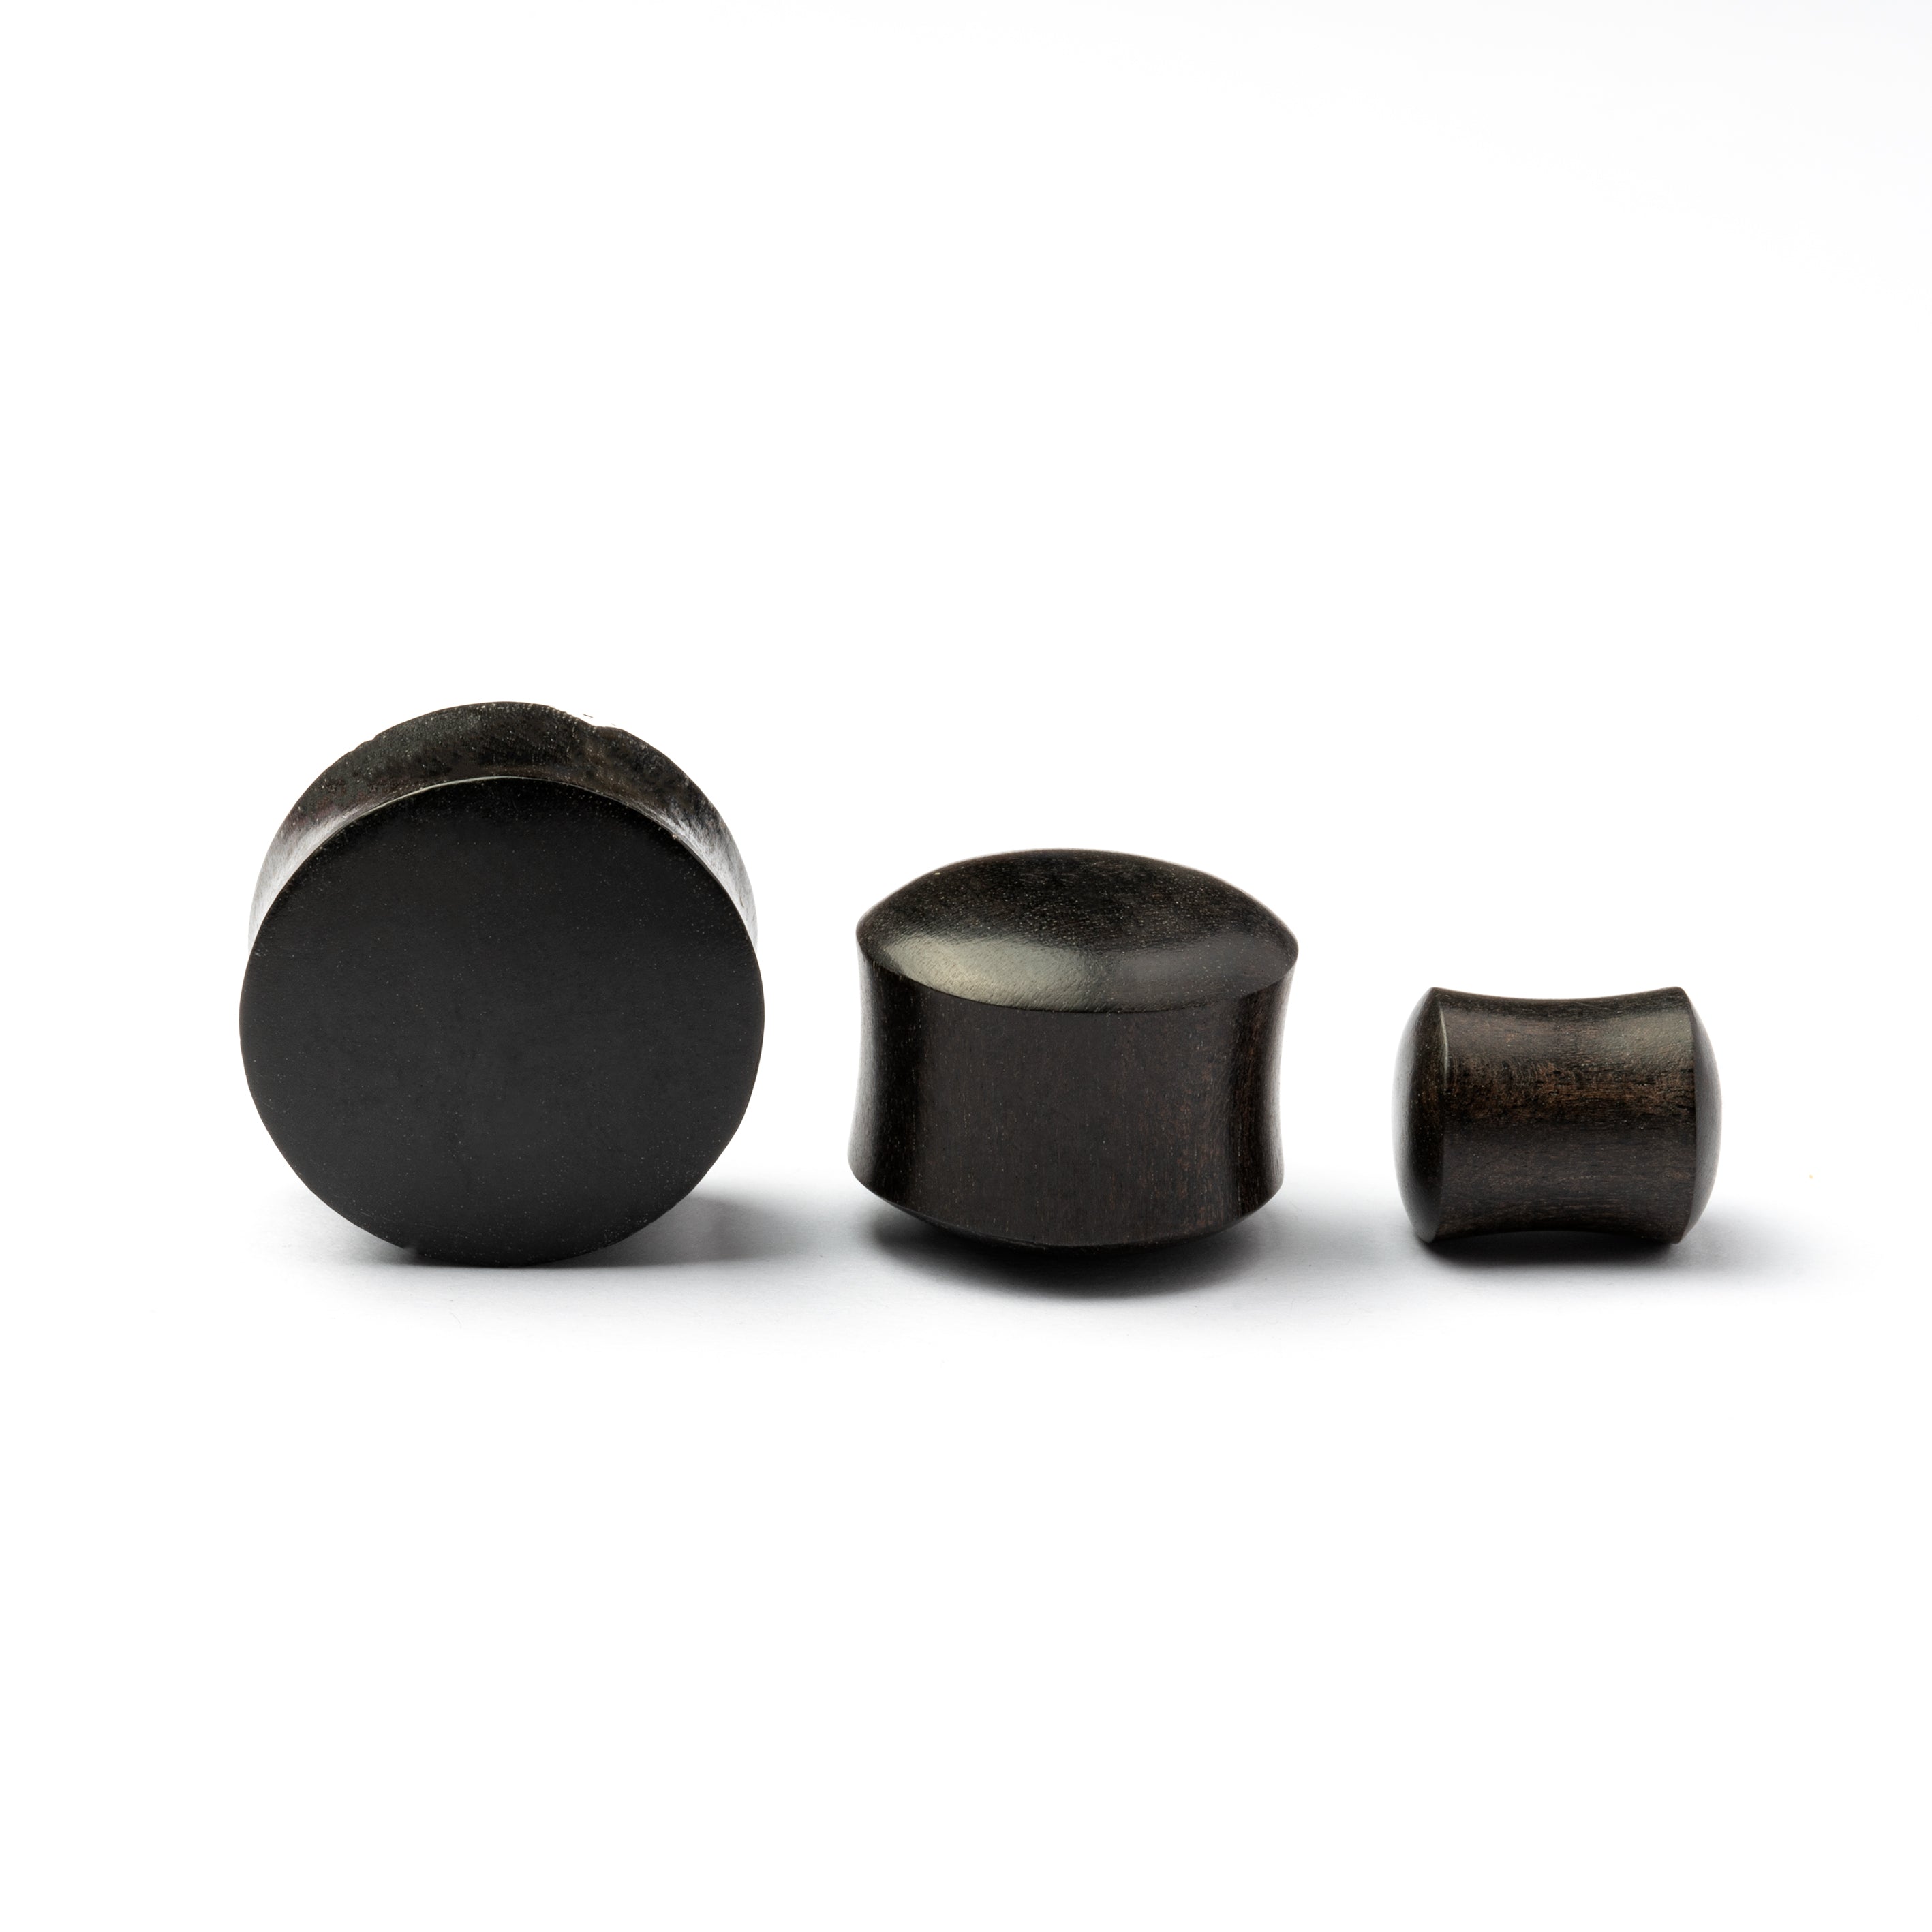 Several sizes of smooth black wood plugs front and side view